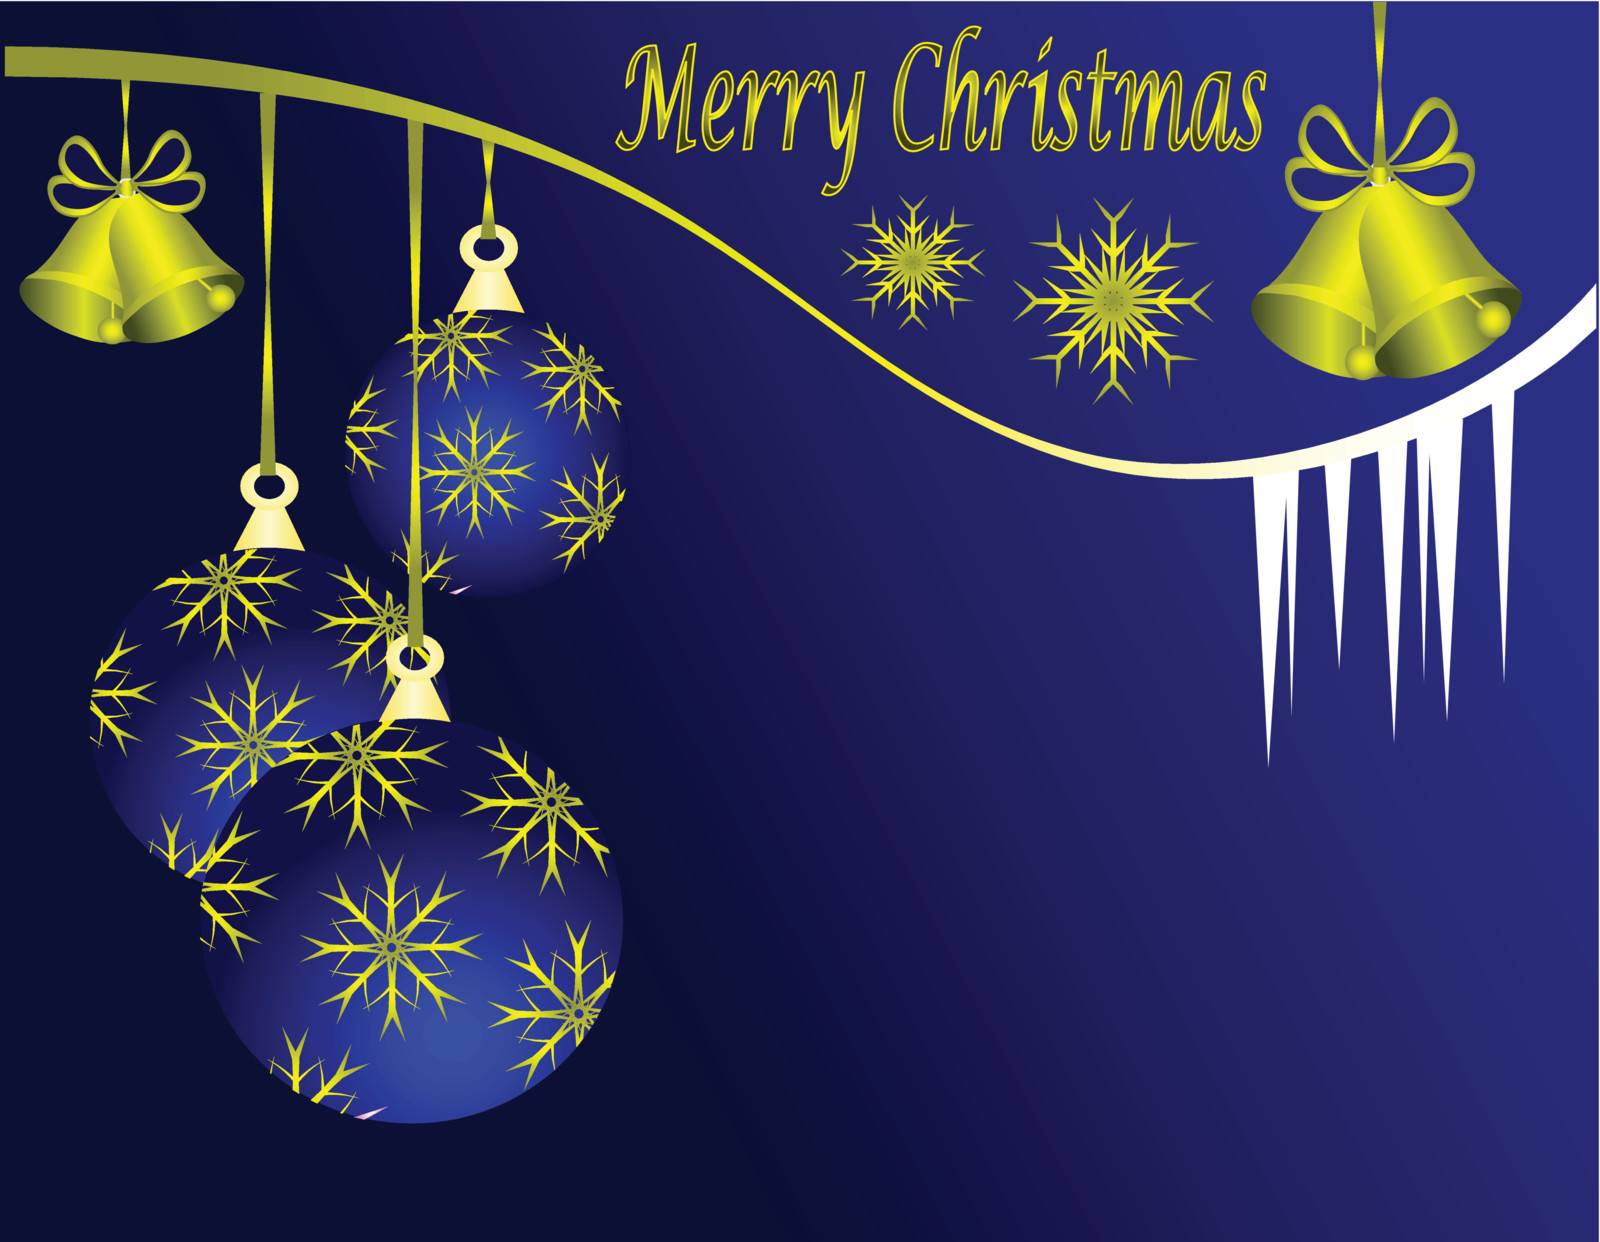 An abstract Christmas vector illustration with blue baubles on a darker backdrop with white snowflakes and room for text